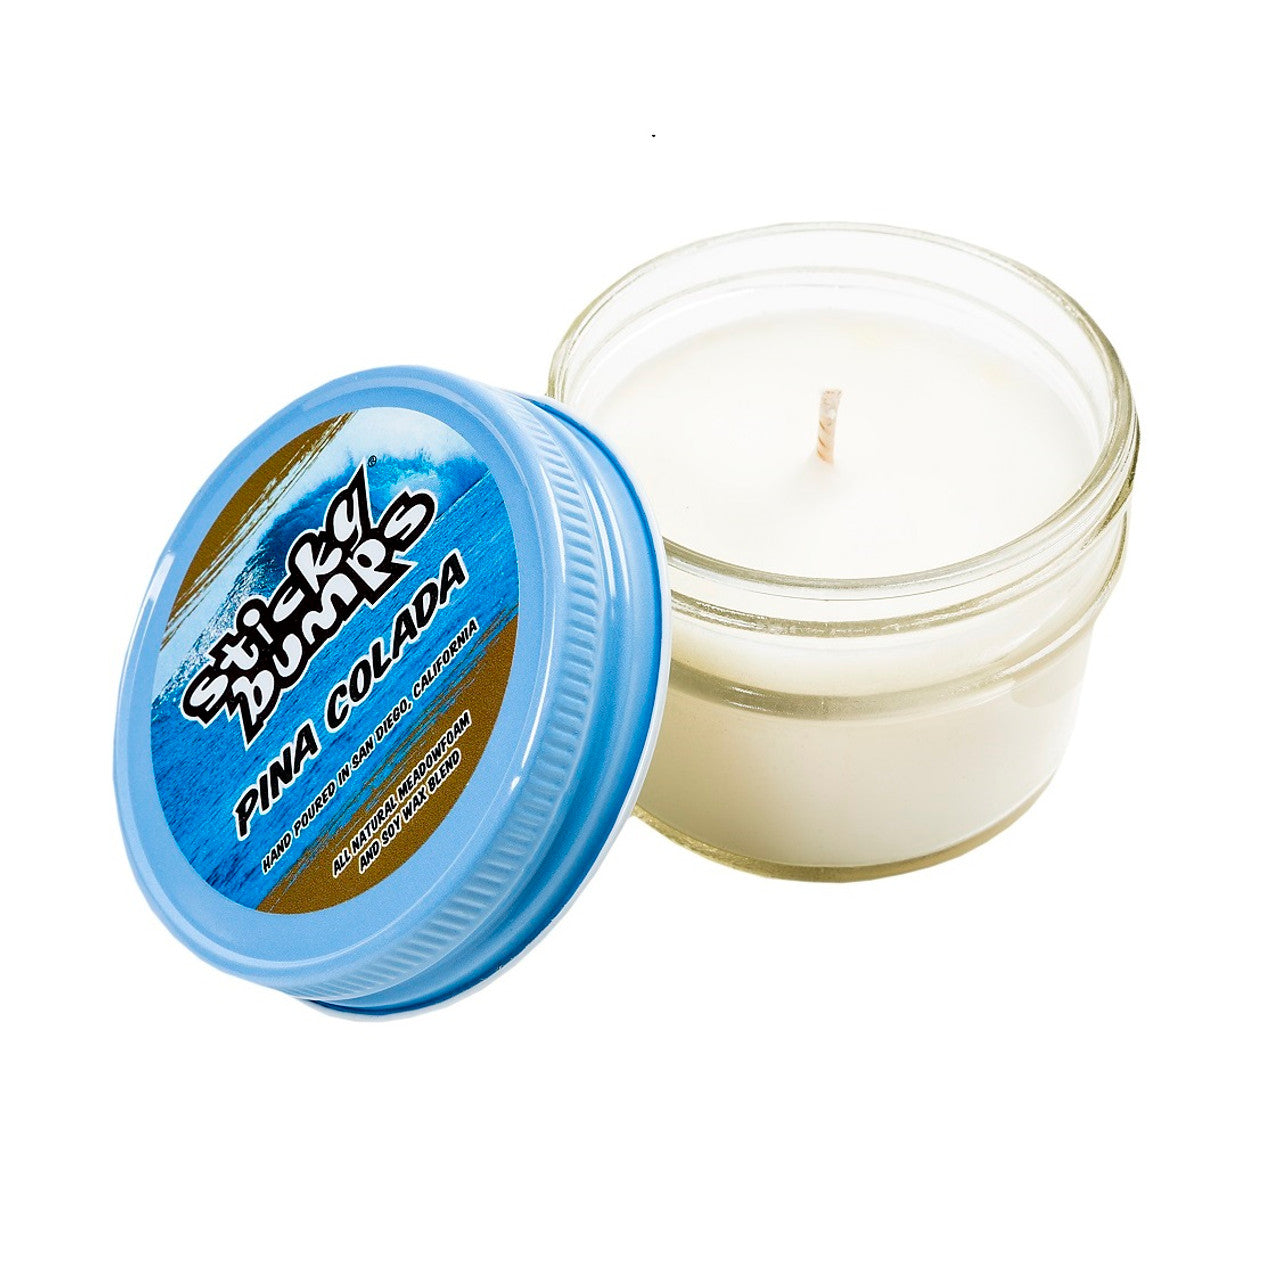 Sticky Bumps Glass Candle PinaColada 3oz